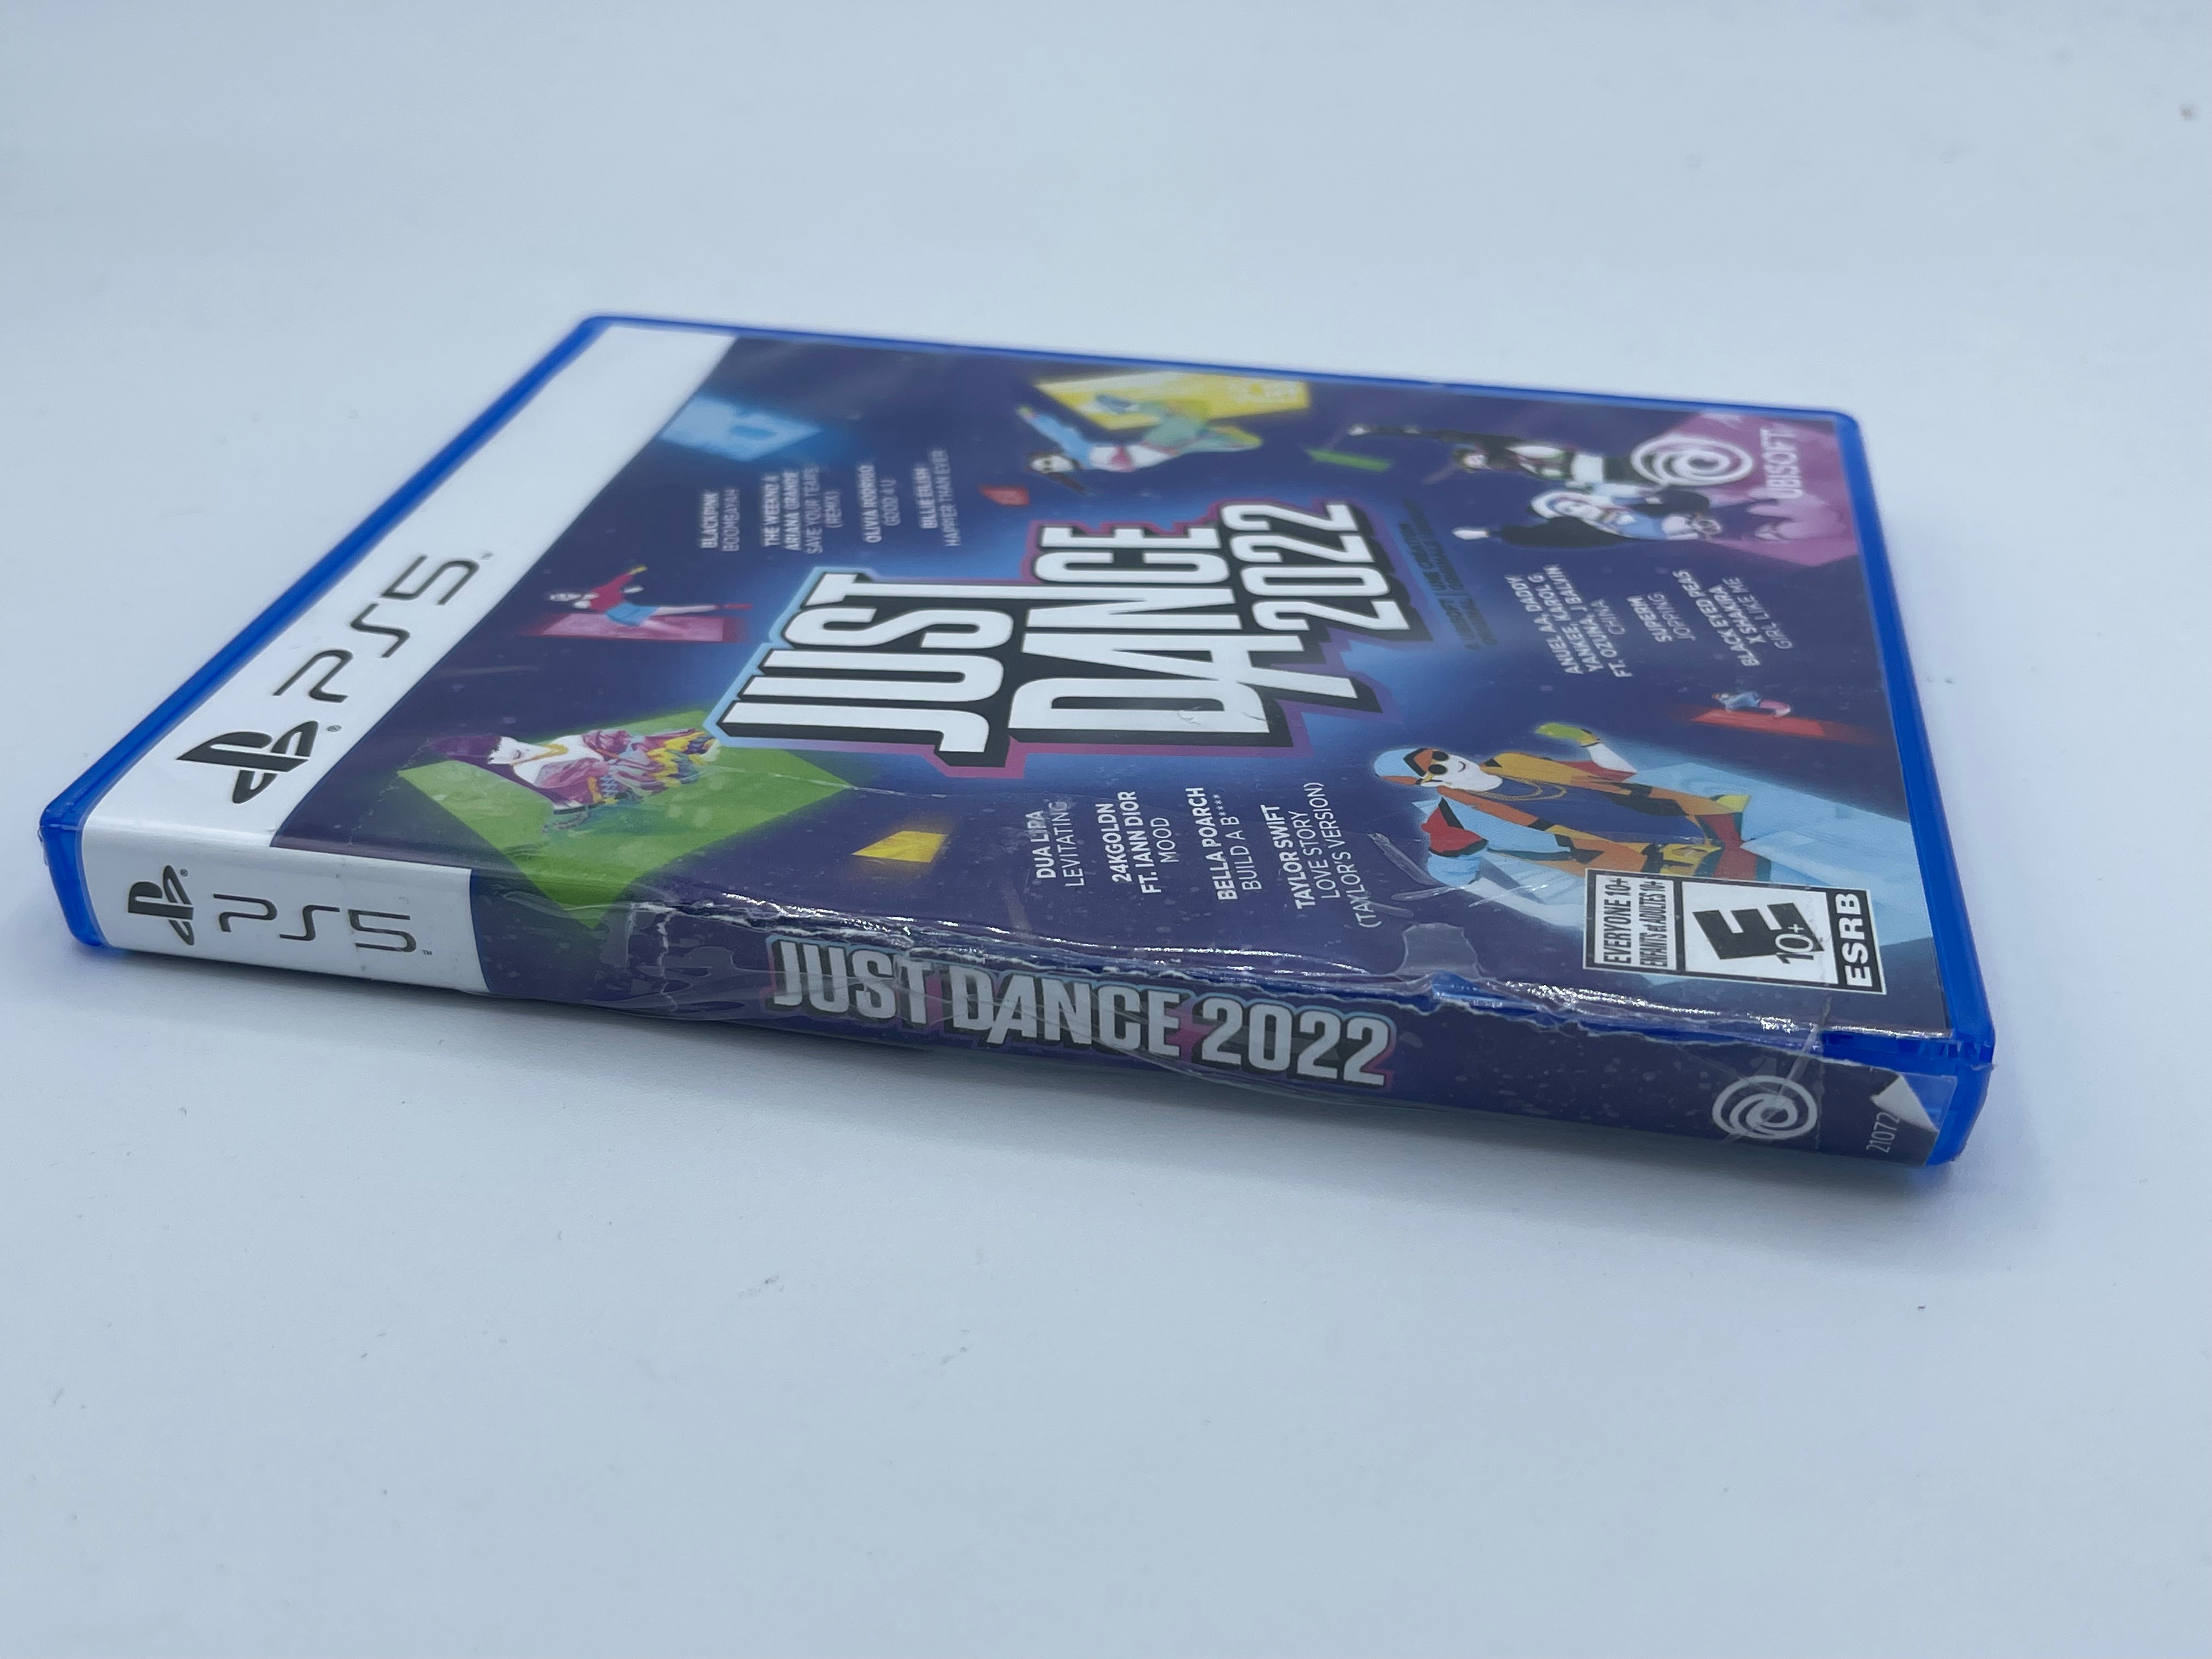 Just Dance 2022 - PS5 Edition